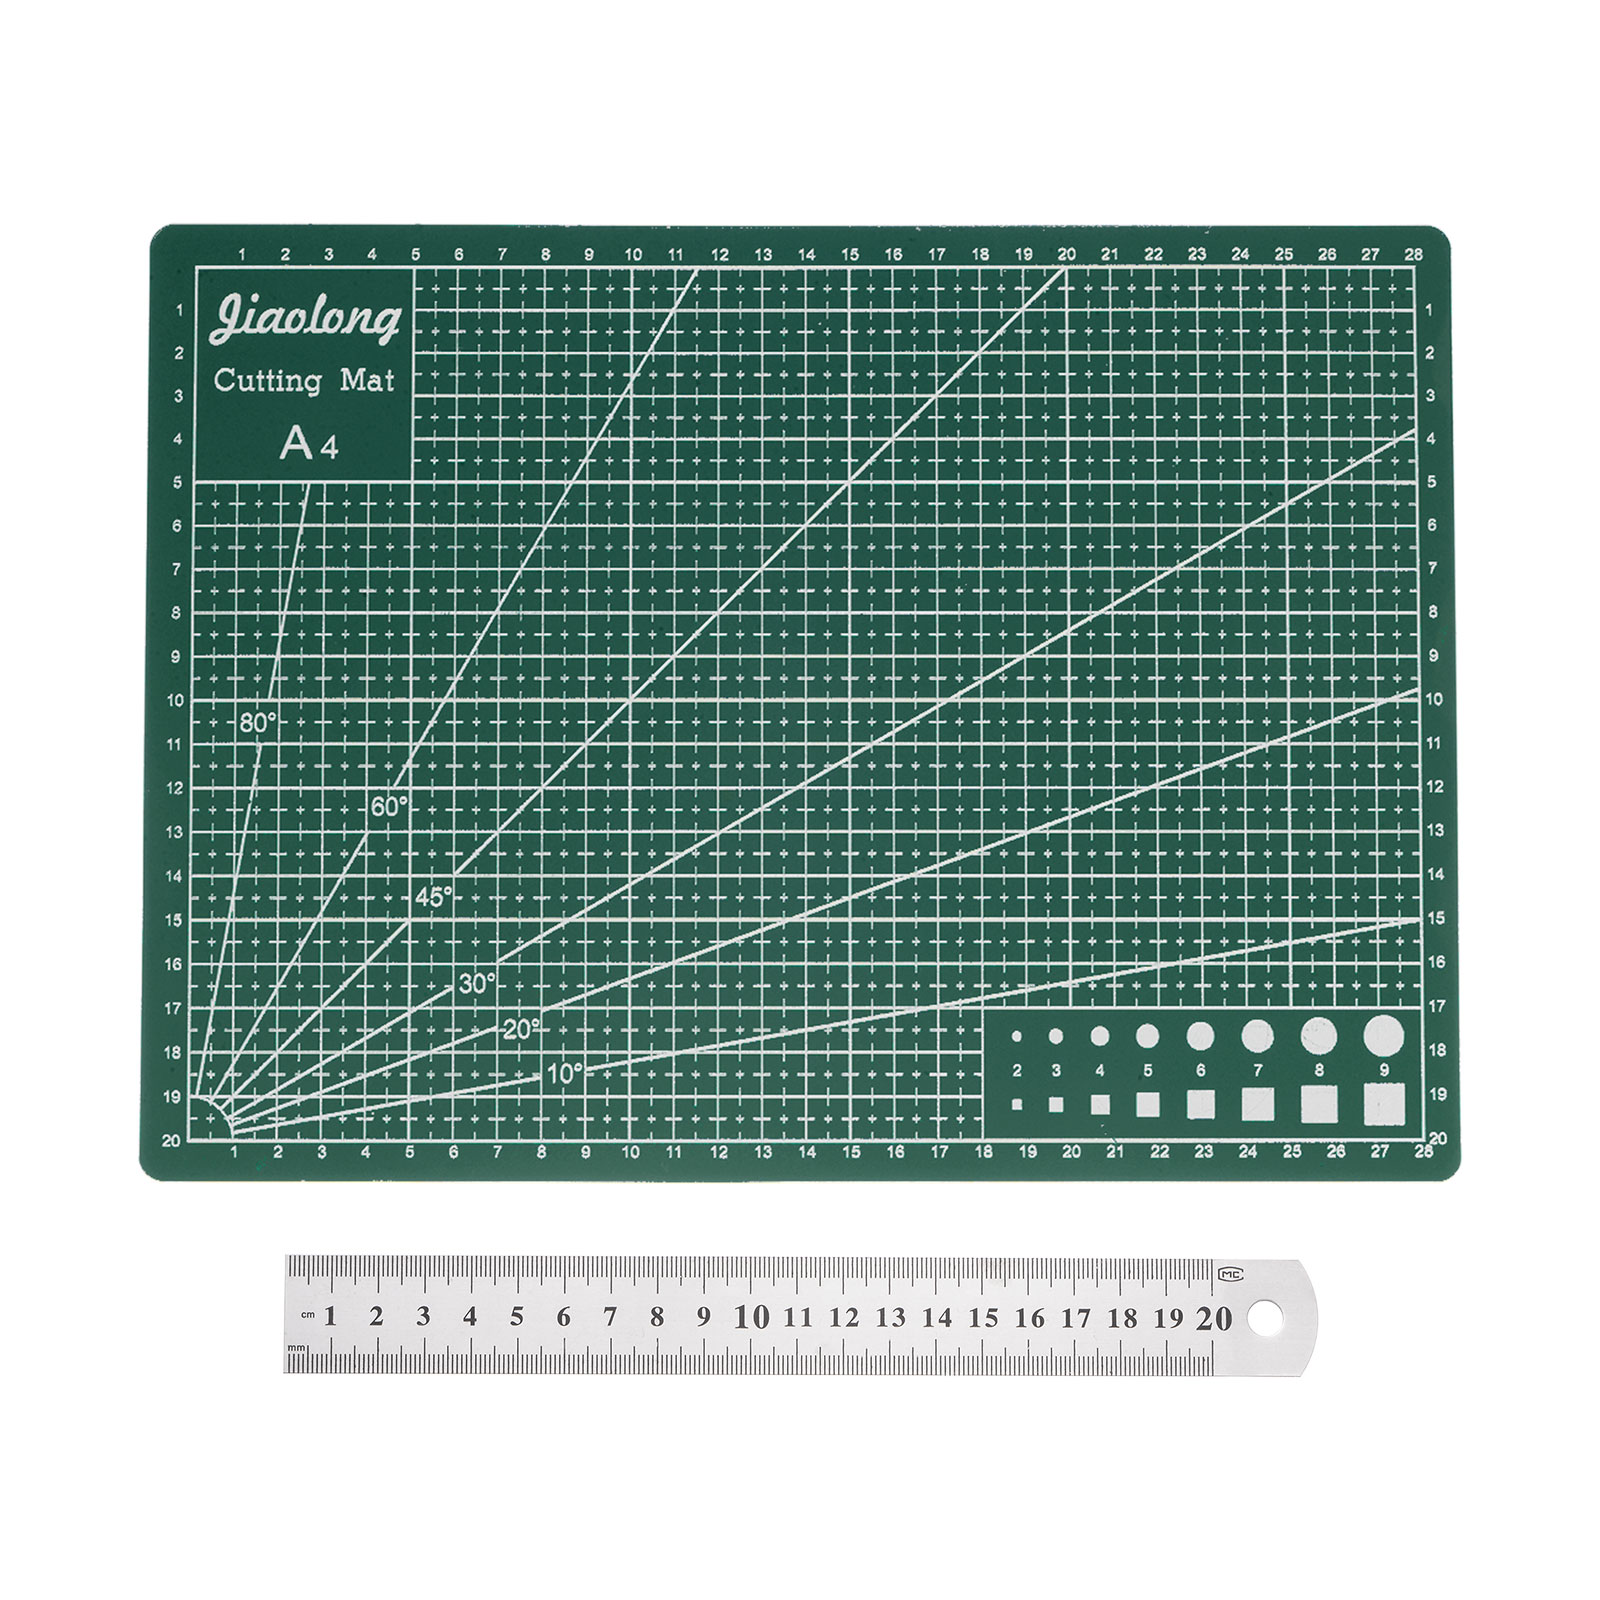 A4 Cutting Mat 12 x 9 Dark Green Craft Mat Non-Slip Cutting Board with 8  Stainless Steel Ruler for Sewing Quilting 